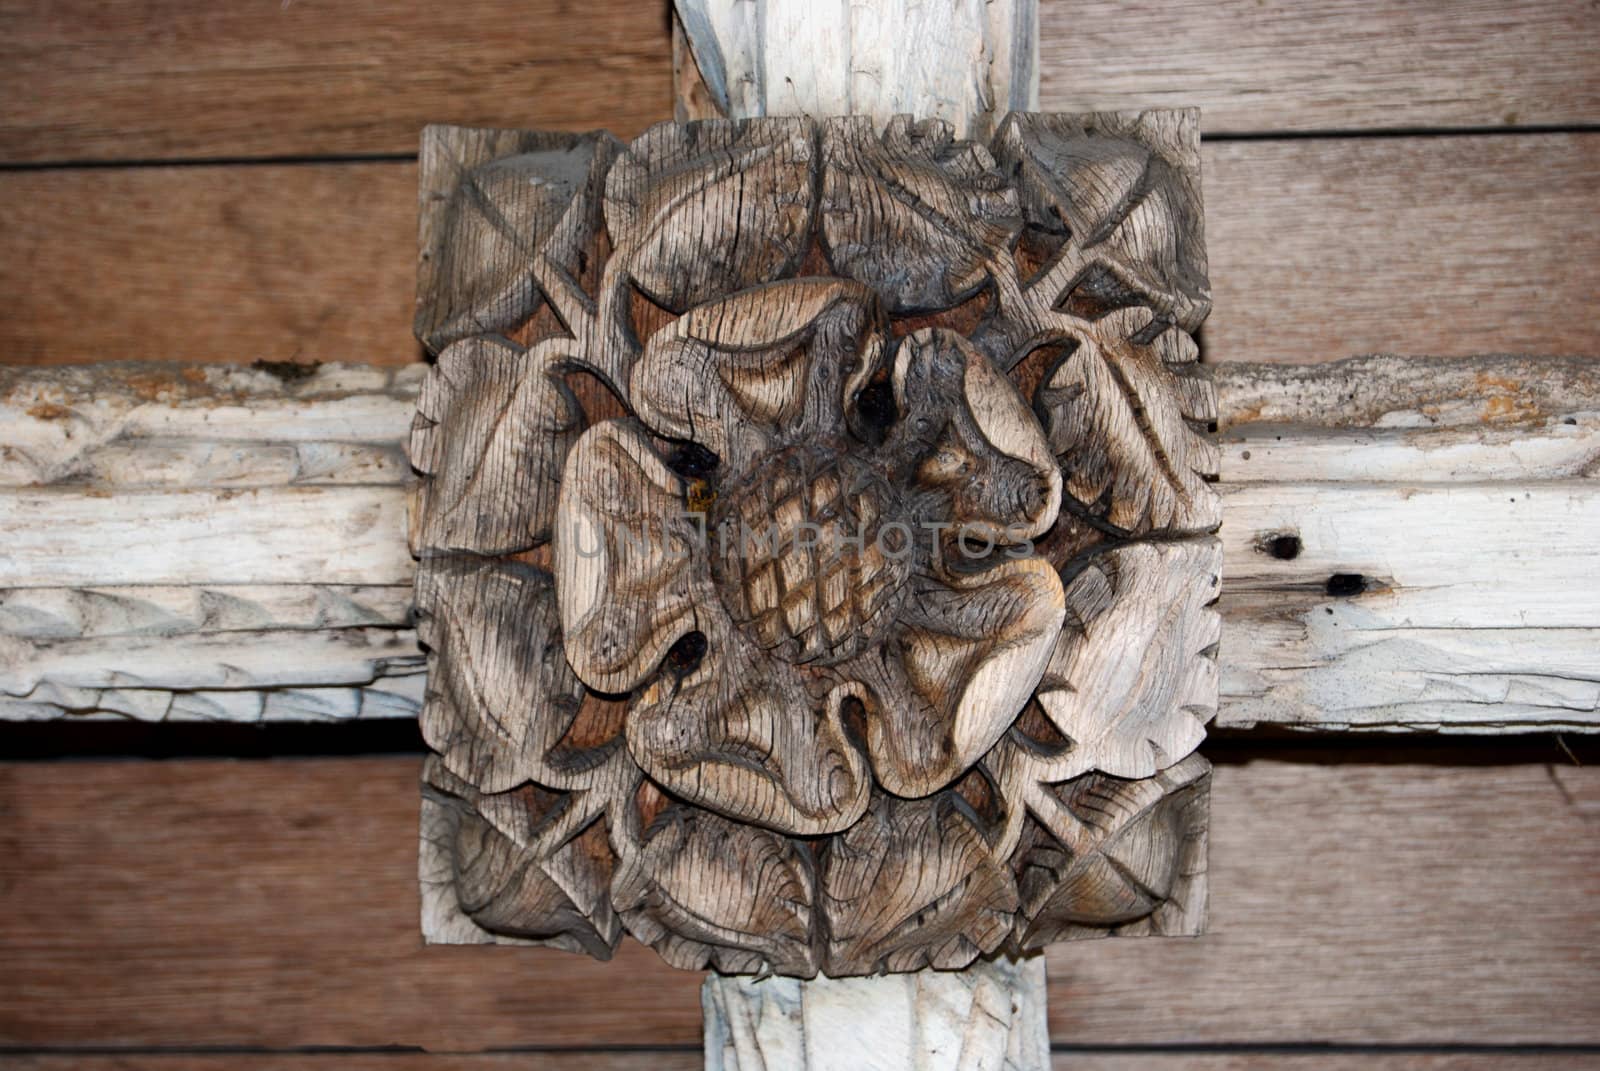 A Tudor rose carved on a church cealing